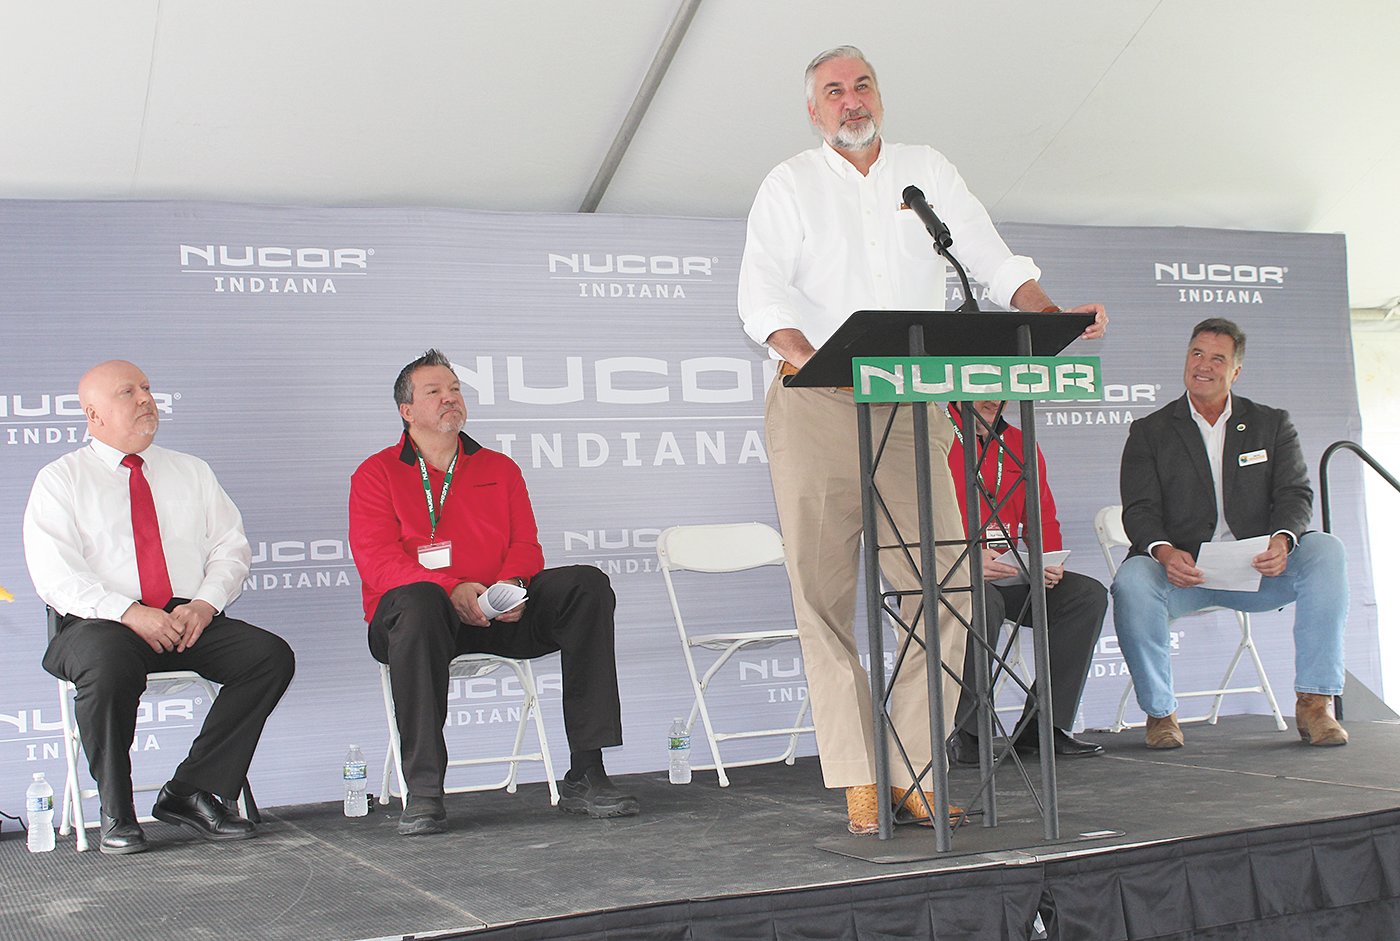 Indiana Gov. Eric Holcomb speaks to a large crowd of Nucor teammates, other state and local officials and community members who gathered for the event.